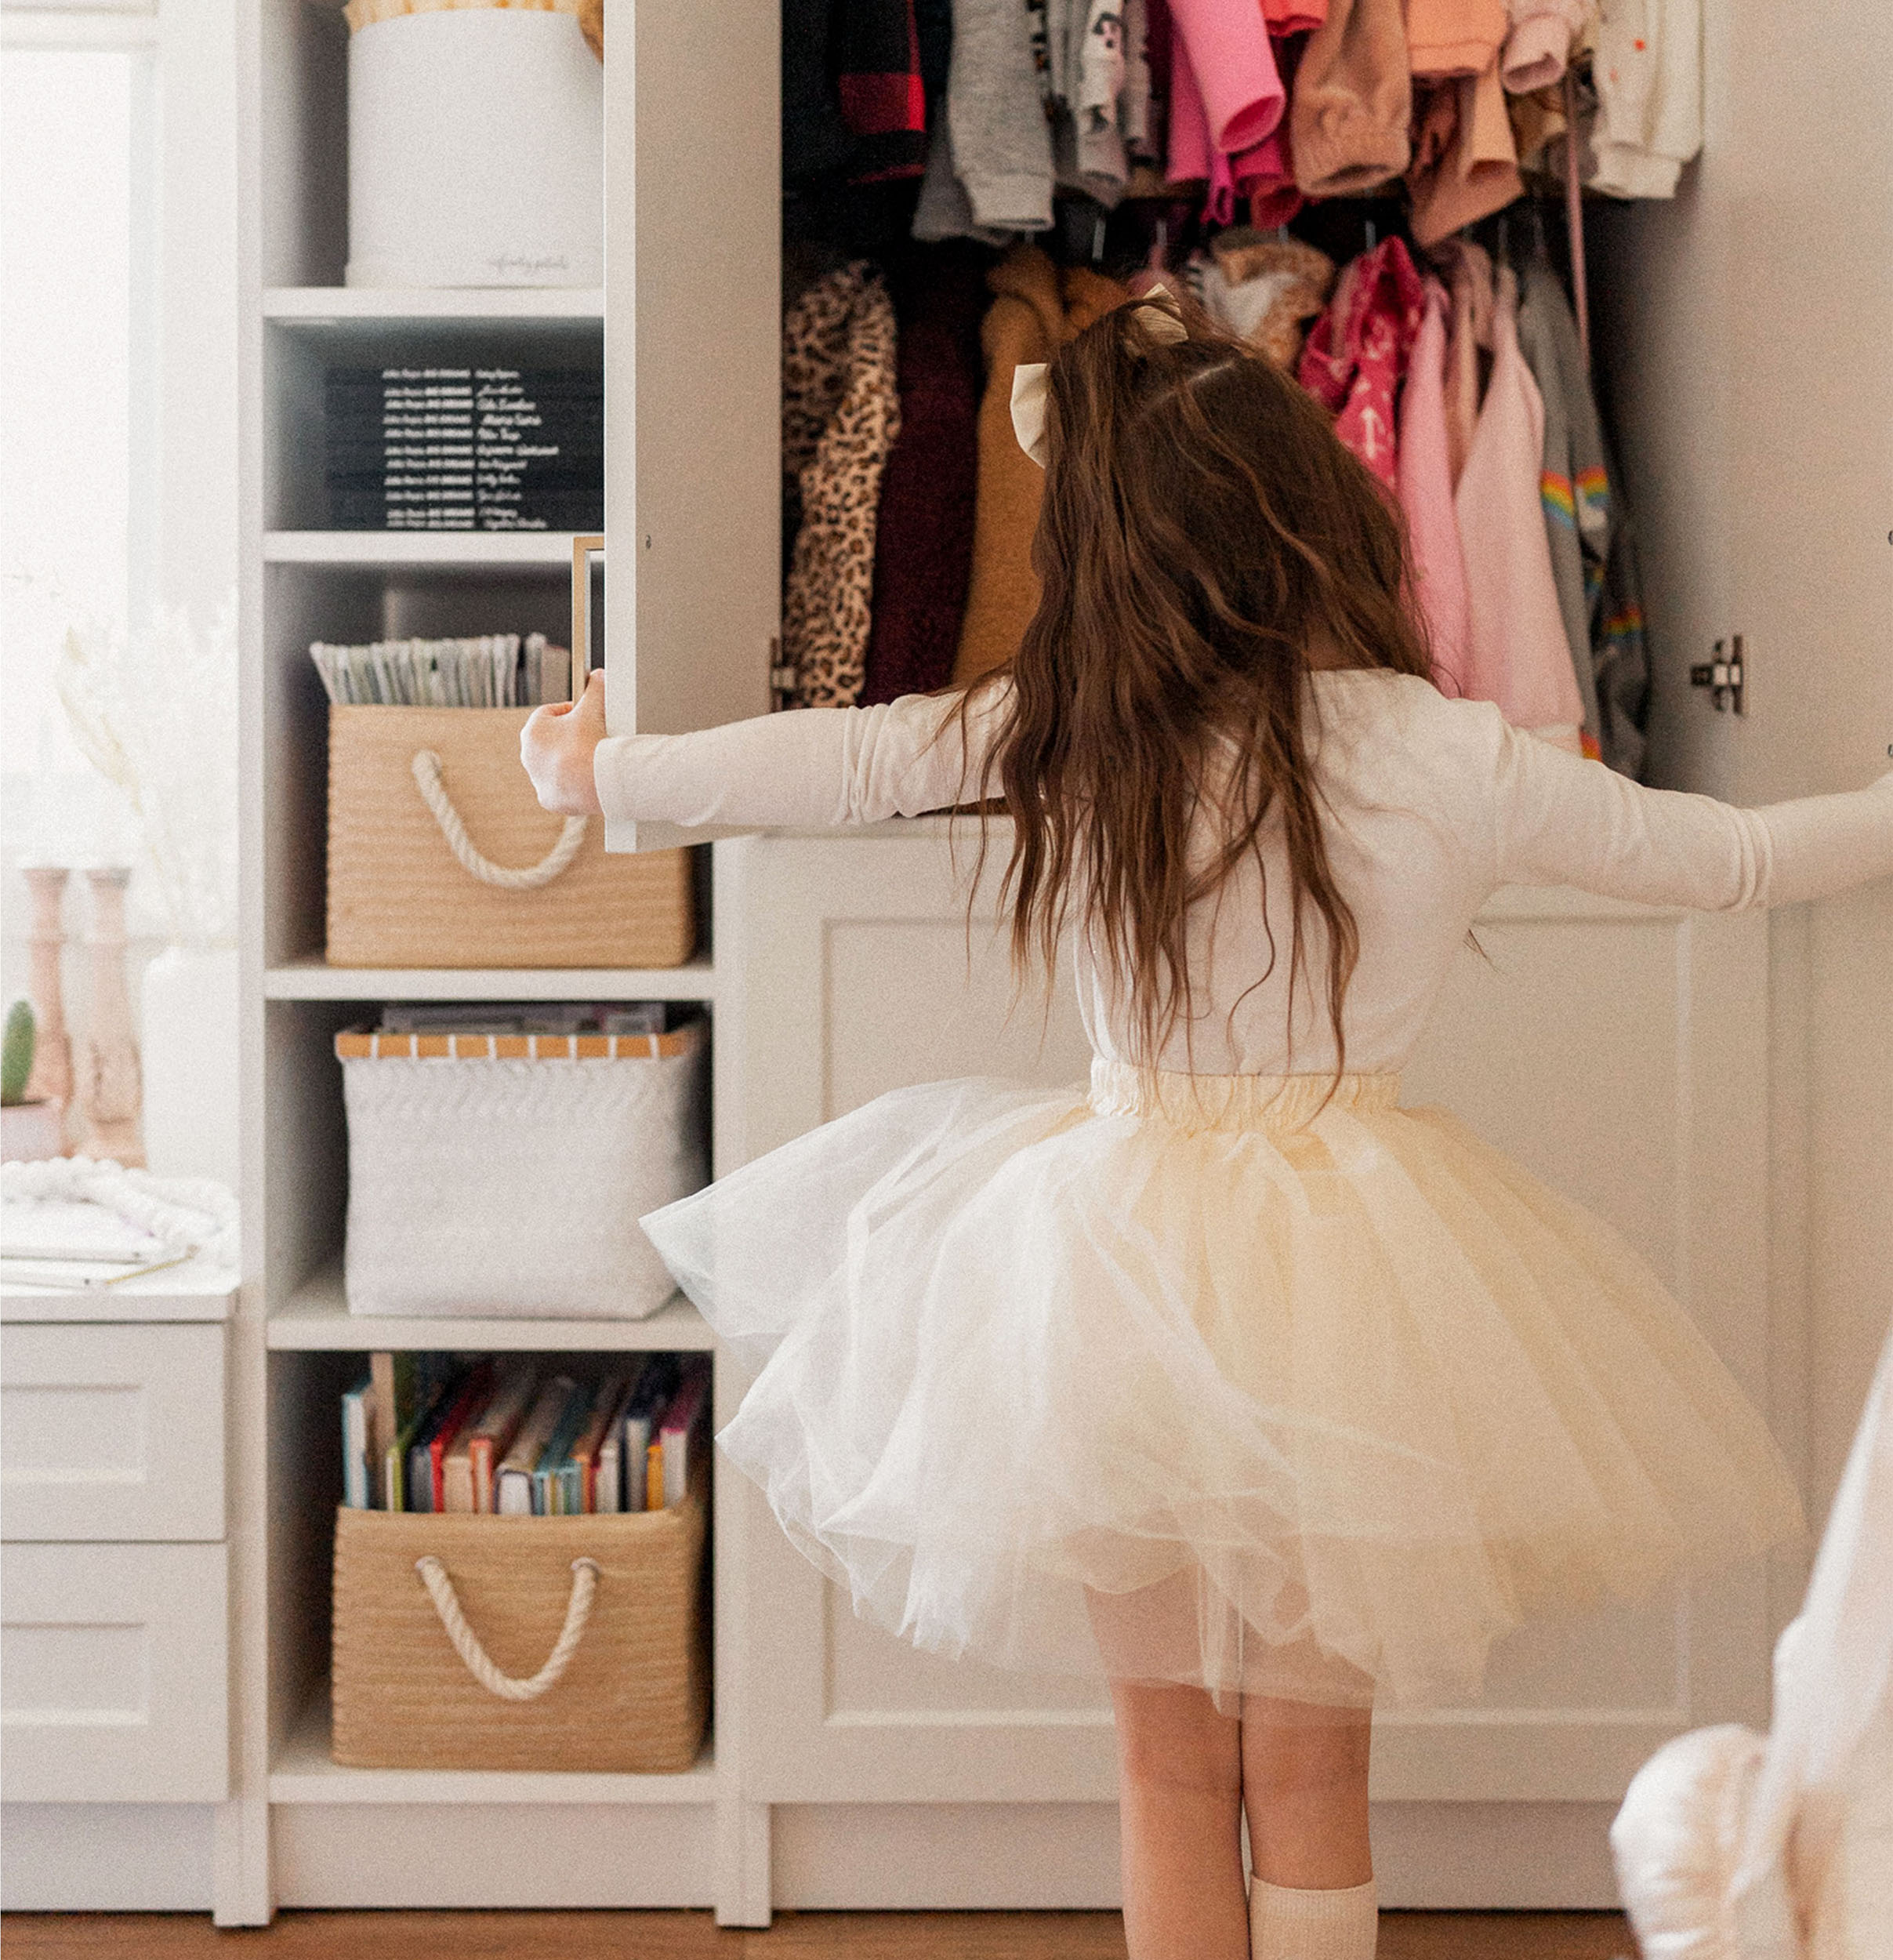 Kids' Rooms Custom Storage Solutions | STOR-X Organizing Systems